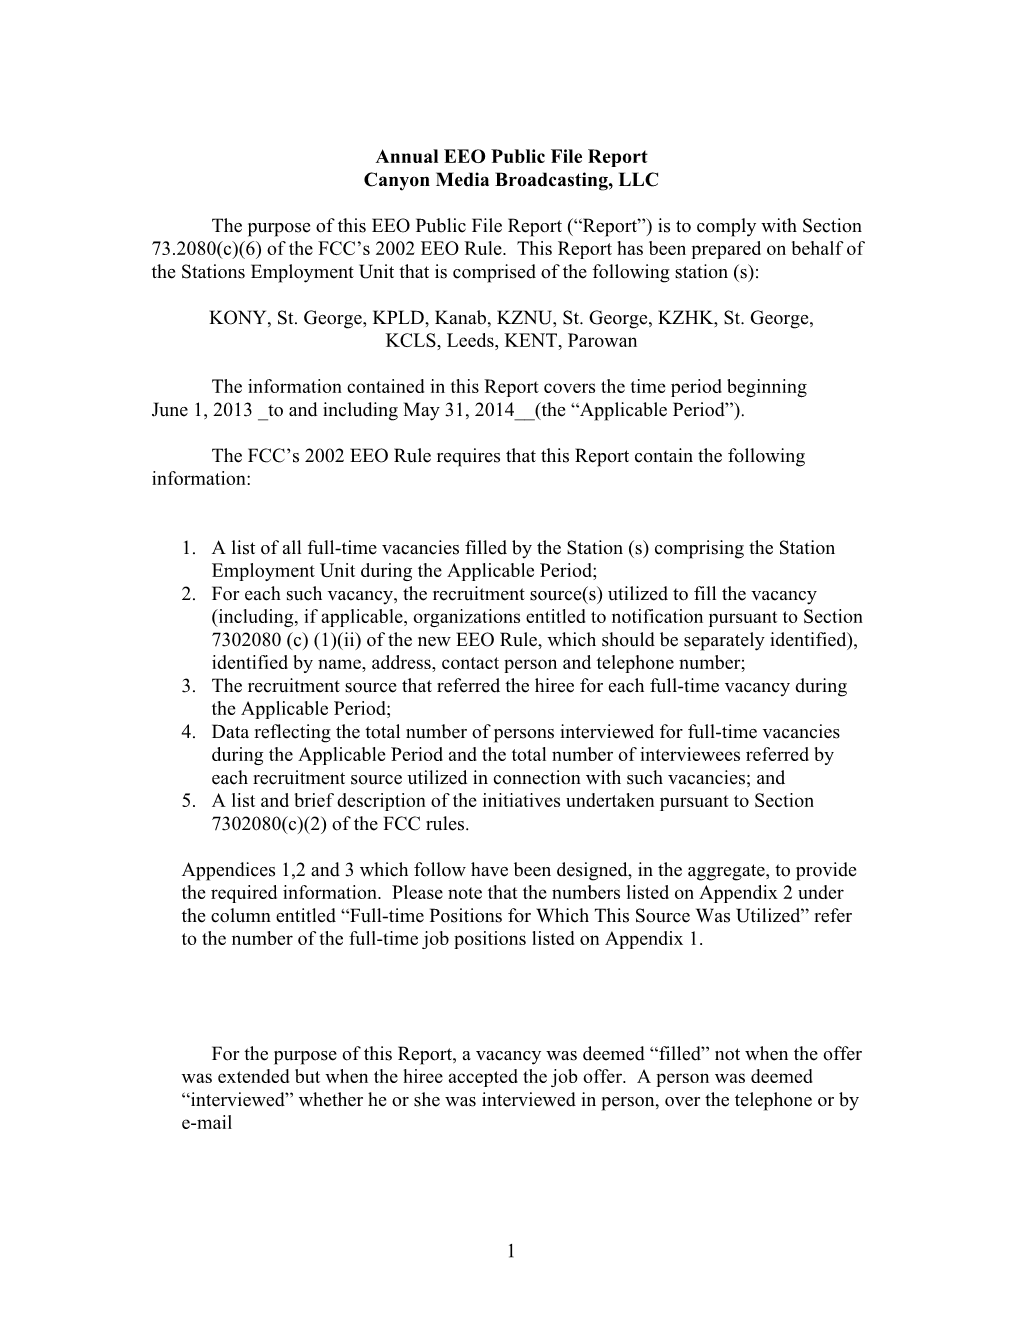 (“Report”) Is to Comply with Section 73.2080(C)(6) of the FCC’S 2002 EEO Rule